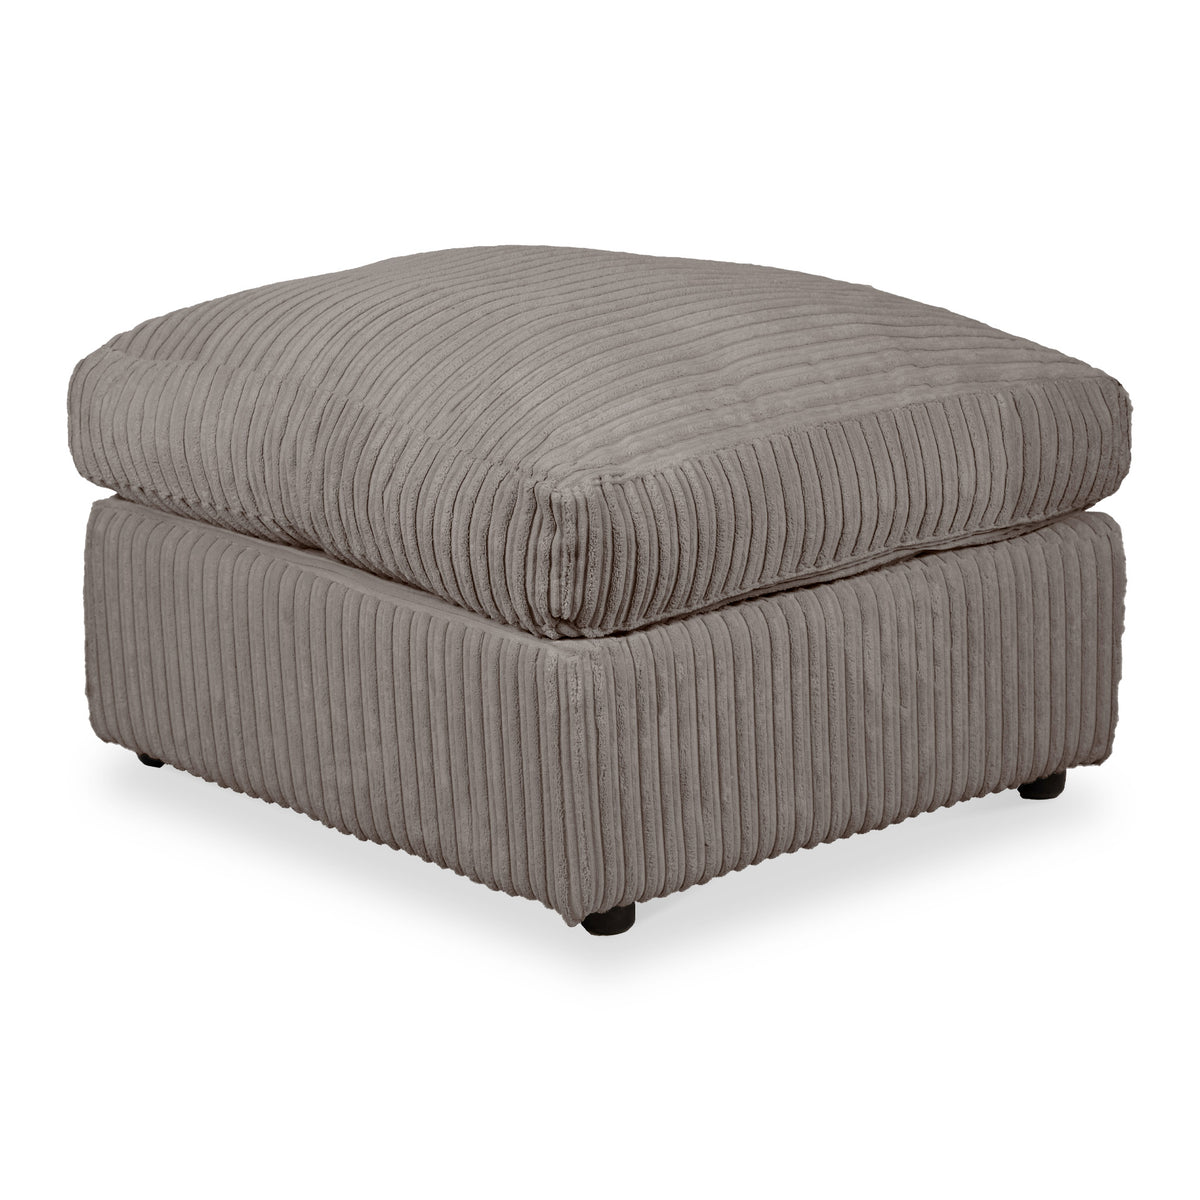 Bletchley Charcoal Jumbo Cord Footstool from Roseland Furniture